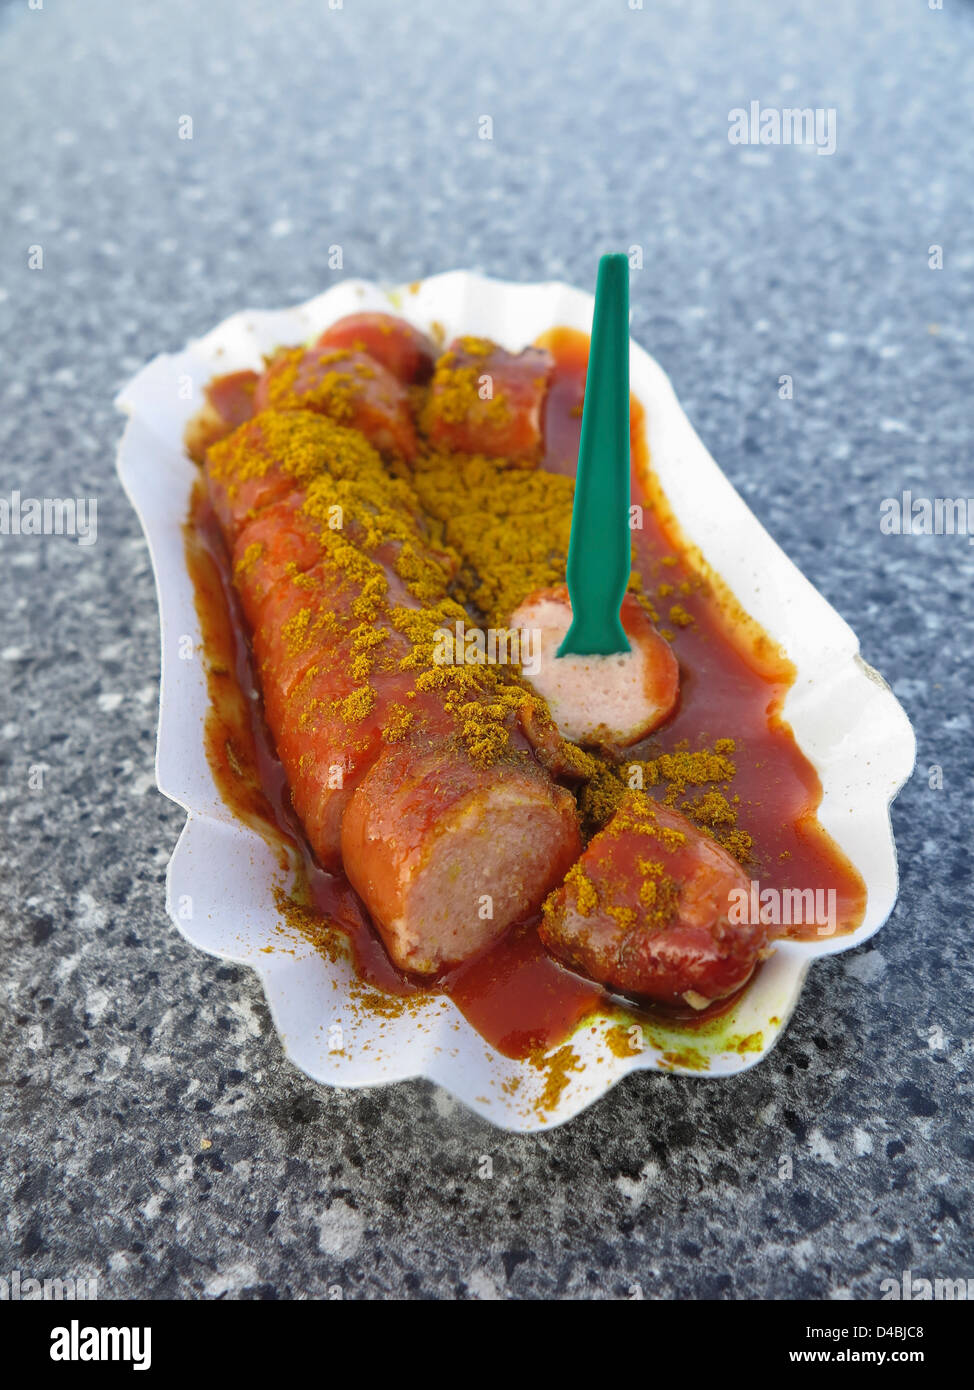 Currywurst - Bratwurst German sliced sausage dish with ketchup and curry Stock Photo